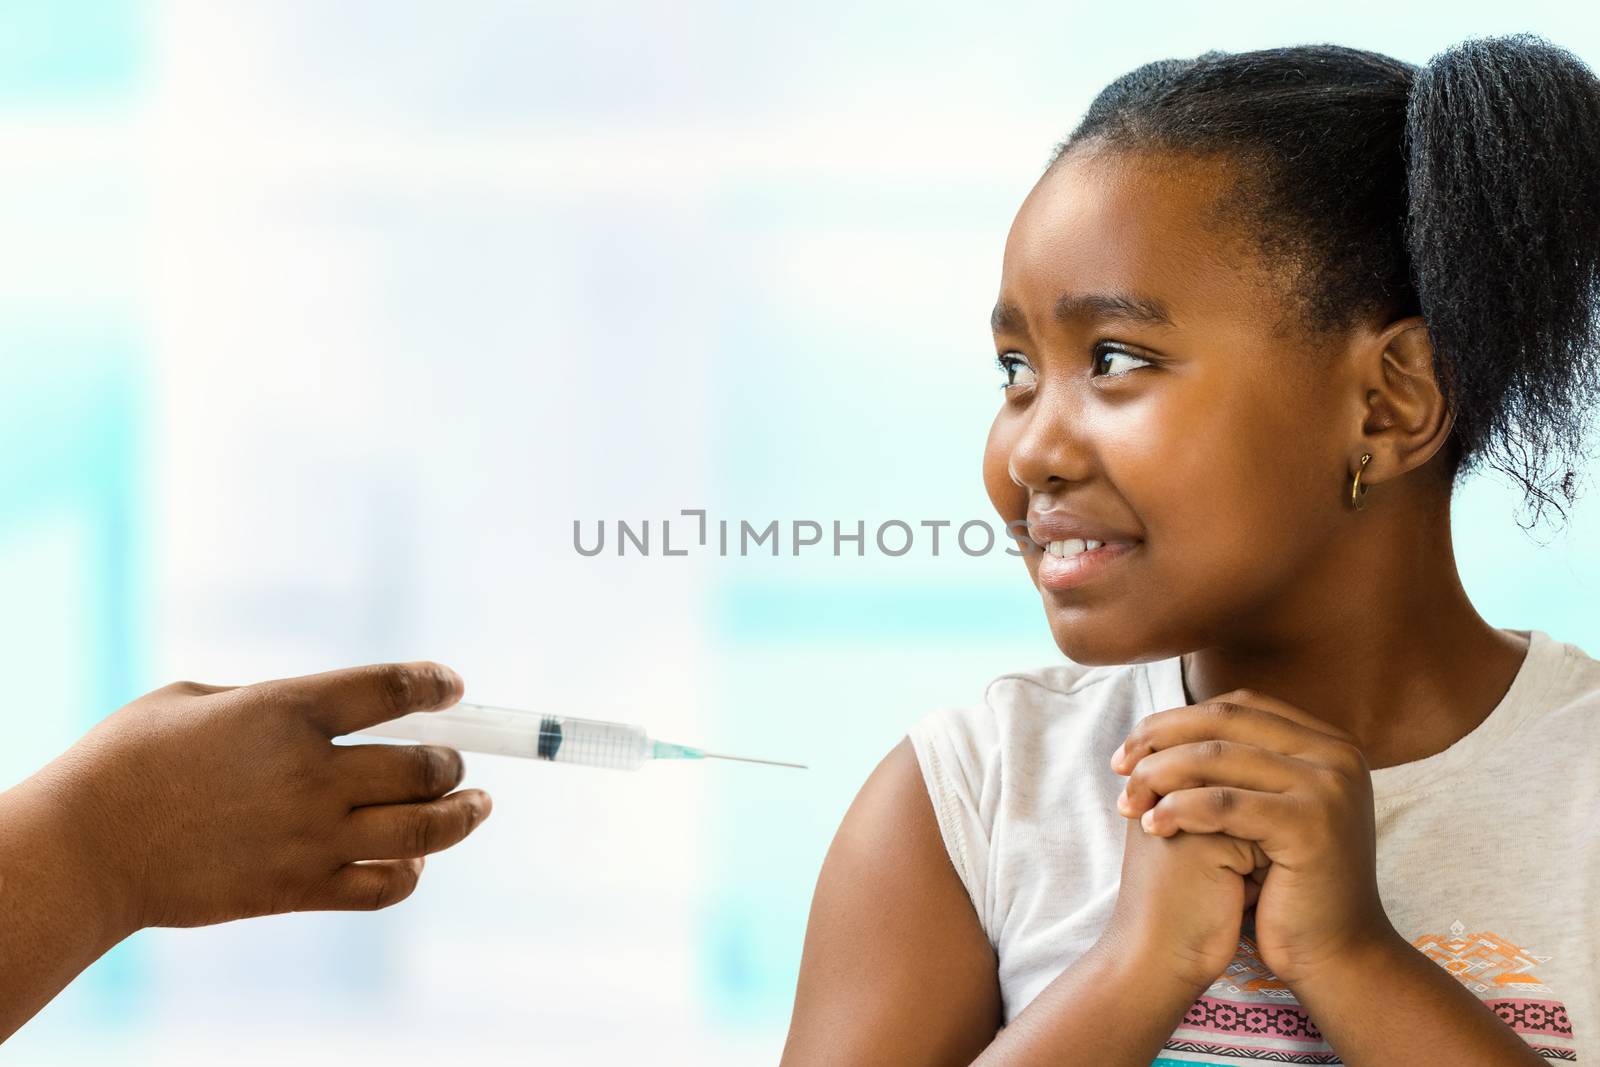 Close up portrait of anxious little african girl scared of syringe with needle.Kid looking aside at doctor with nervous facial expression. Hand holding syringe near upper arm.